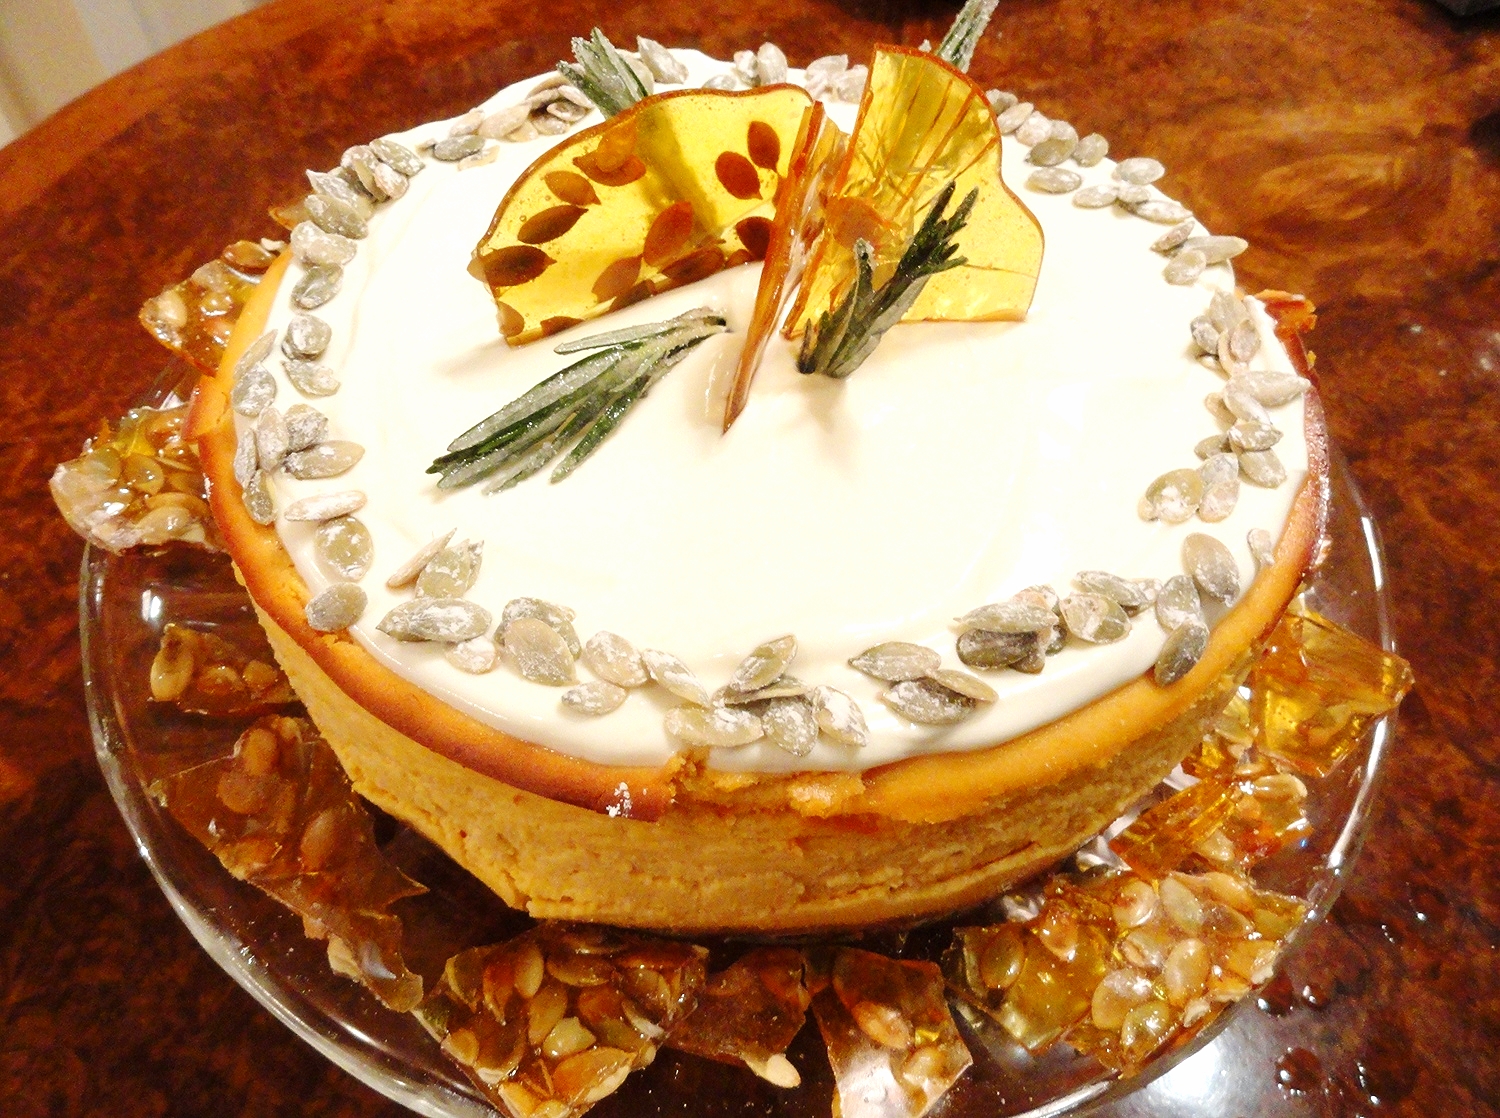 Pumpkin cheesecake, sweetened sour cream topping, sugared pepitas and rosemary, pumpkin seed brittle